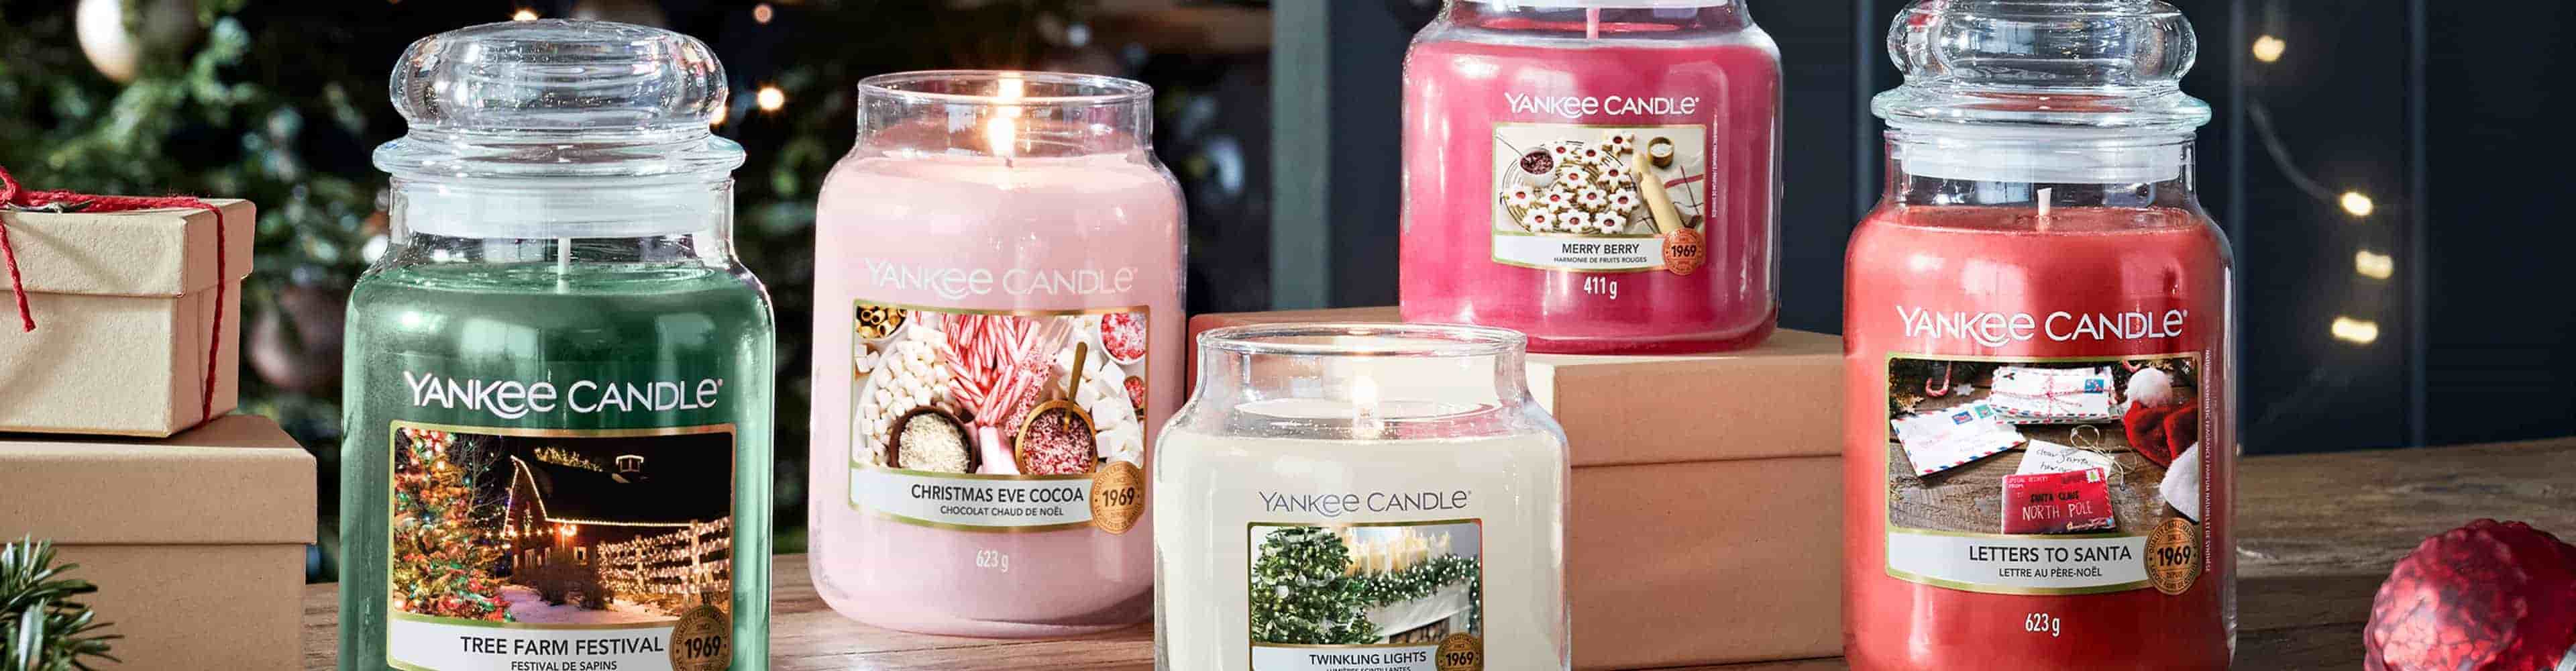 Yankee Candle Outlet